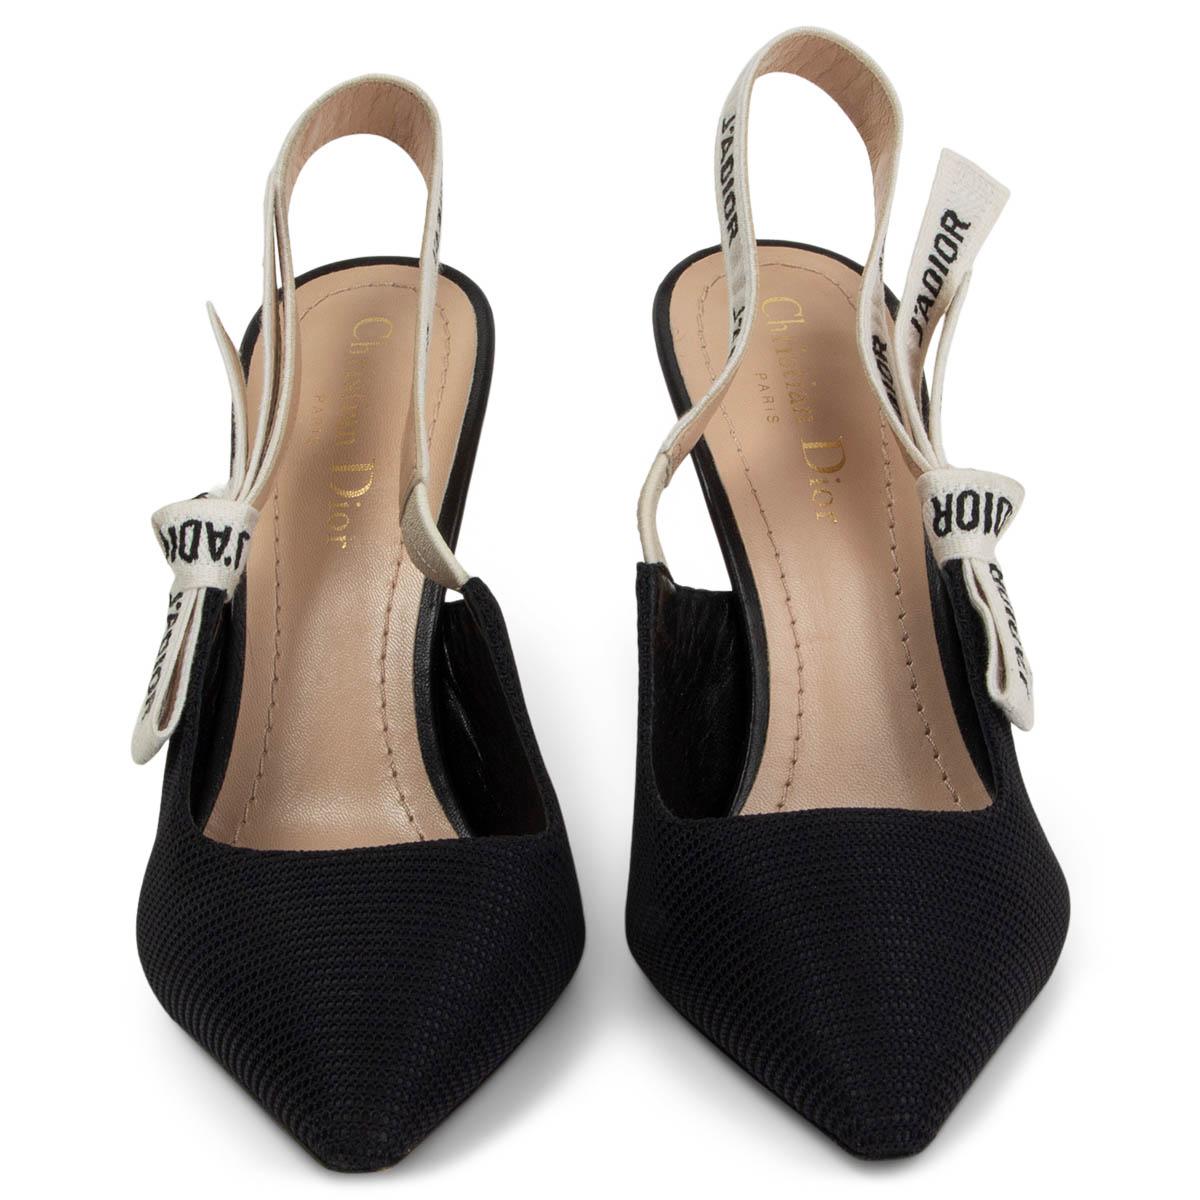 100% authentic Christian Dior J'Adior slingback pumps in black technical fabric with a calfskin heel. Embellished with a two-tone embroidered 'J'ADIOR' ribbon with a flat bow. Have been worn and are in excellent condition. Come with dust bag.